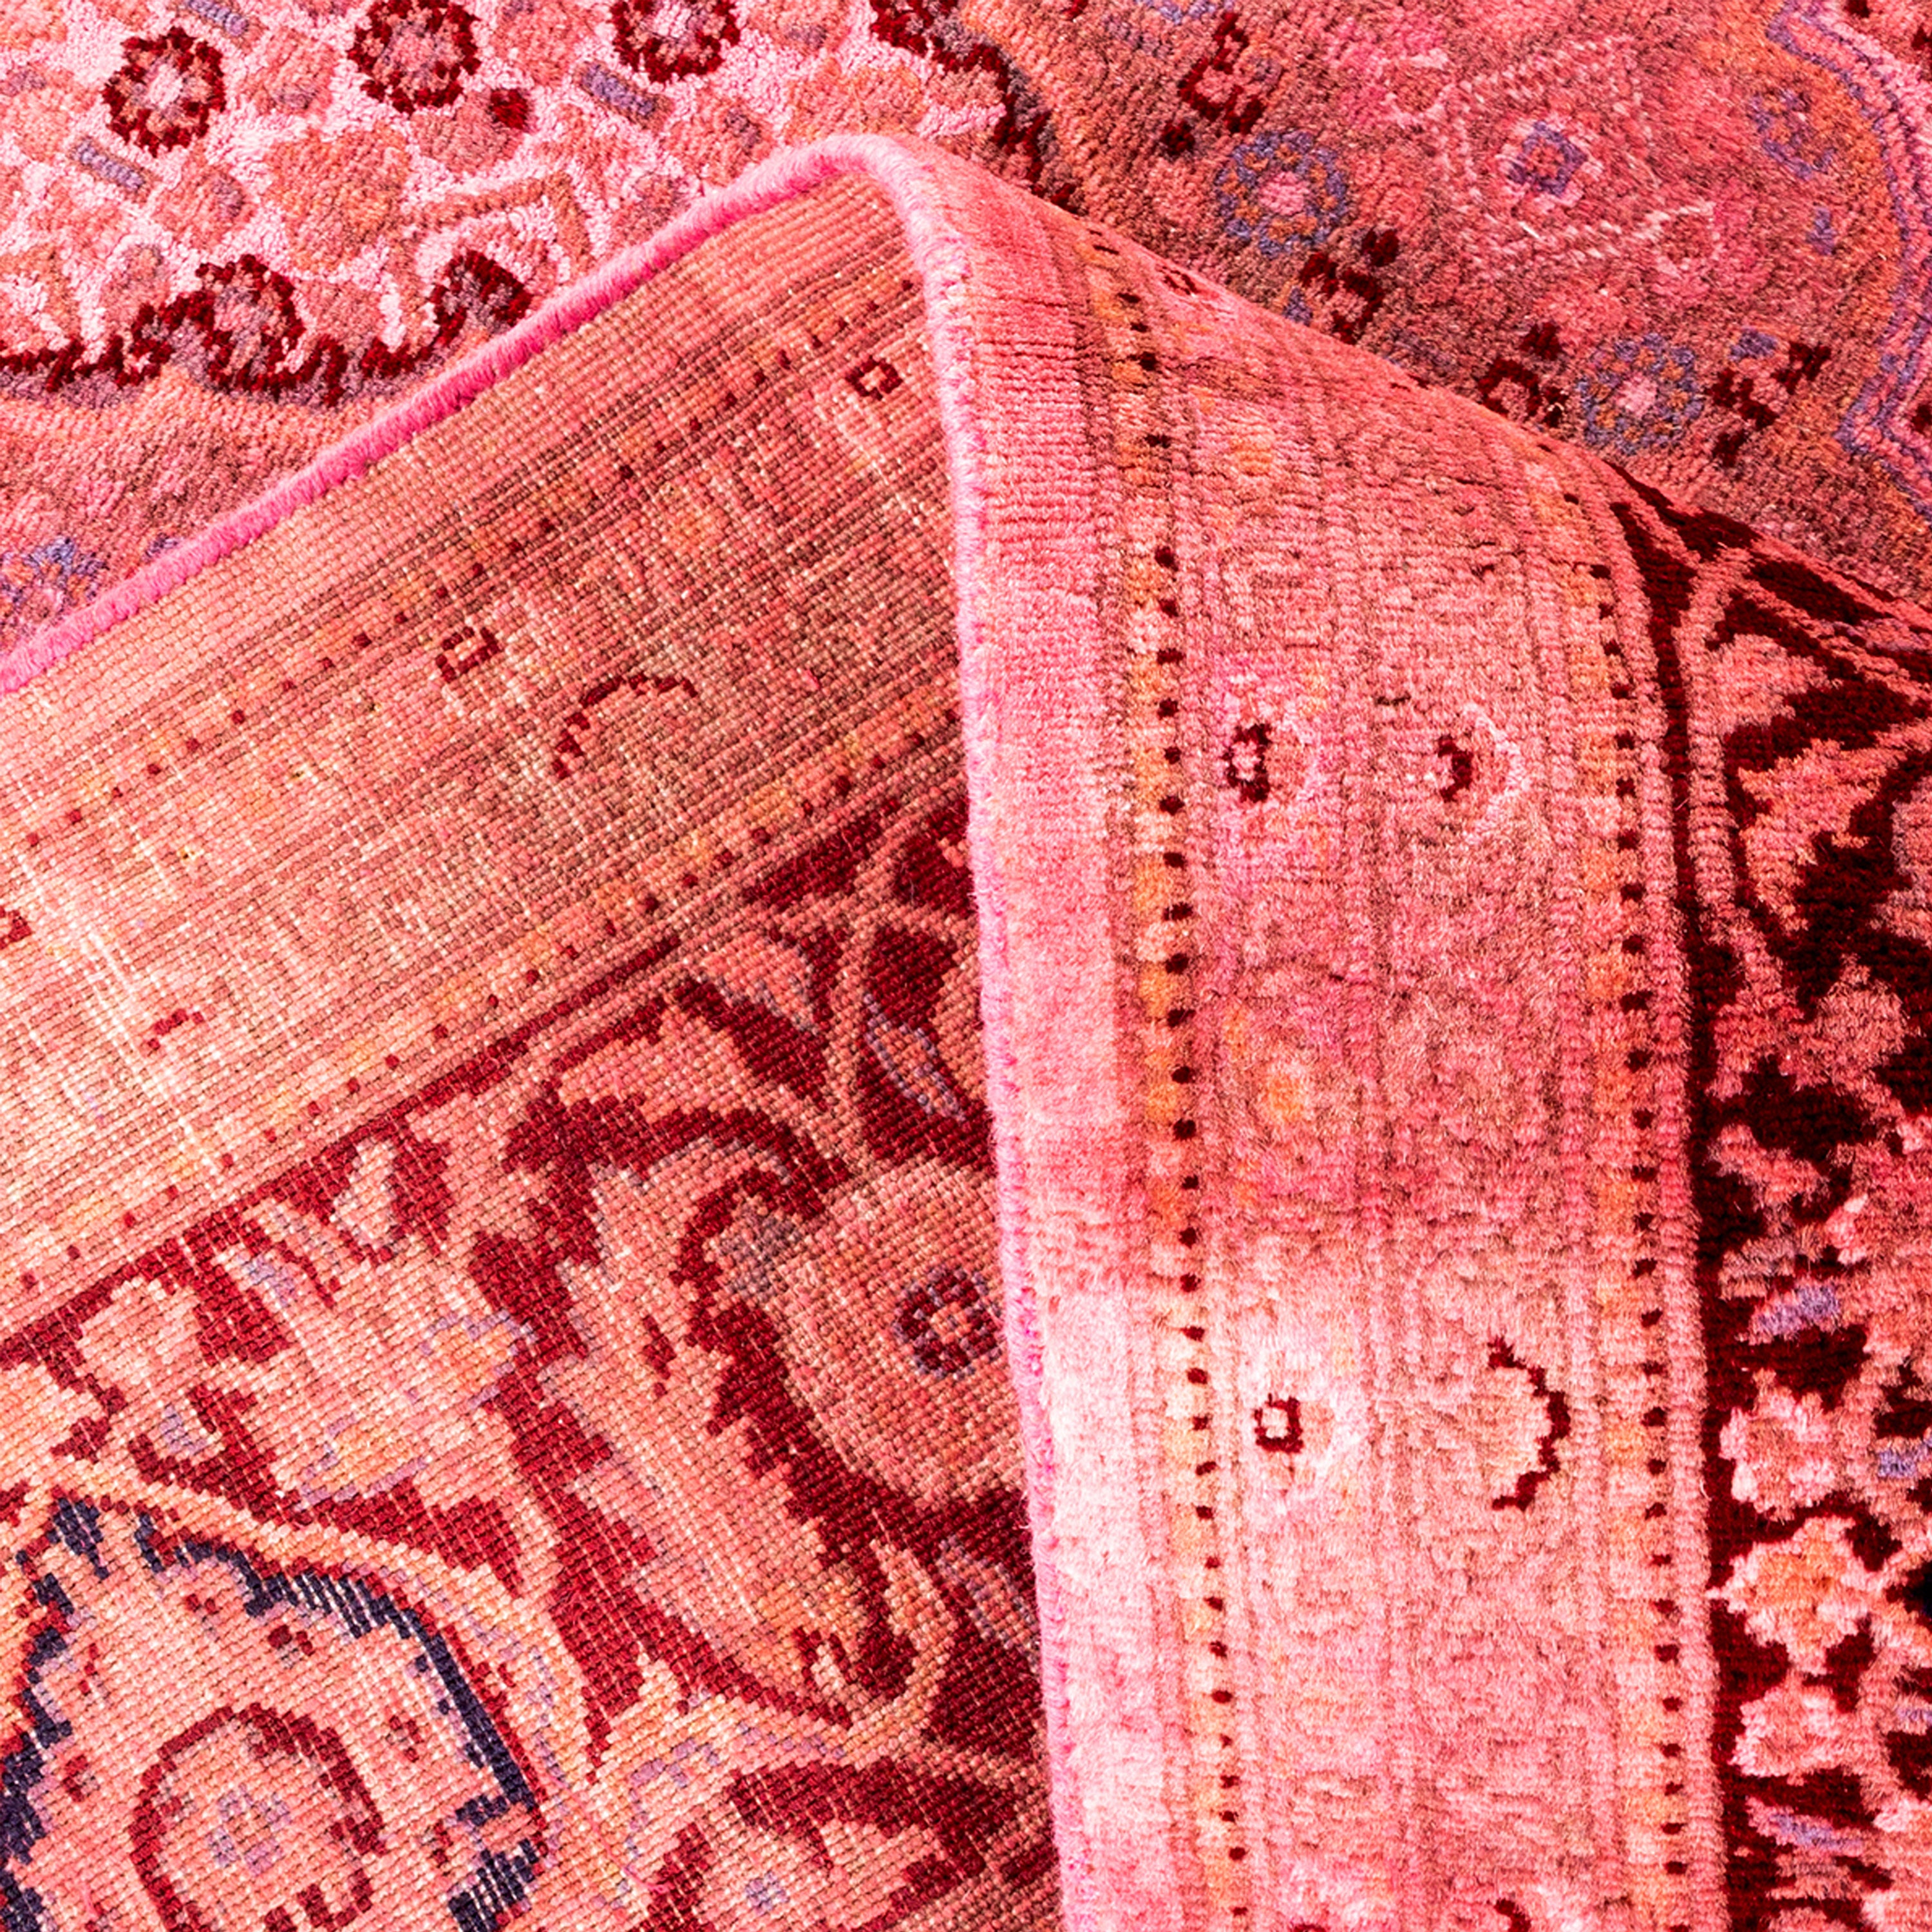 Pink Overdyed Wool Rug - 8' 1" x 10' 5"